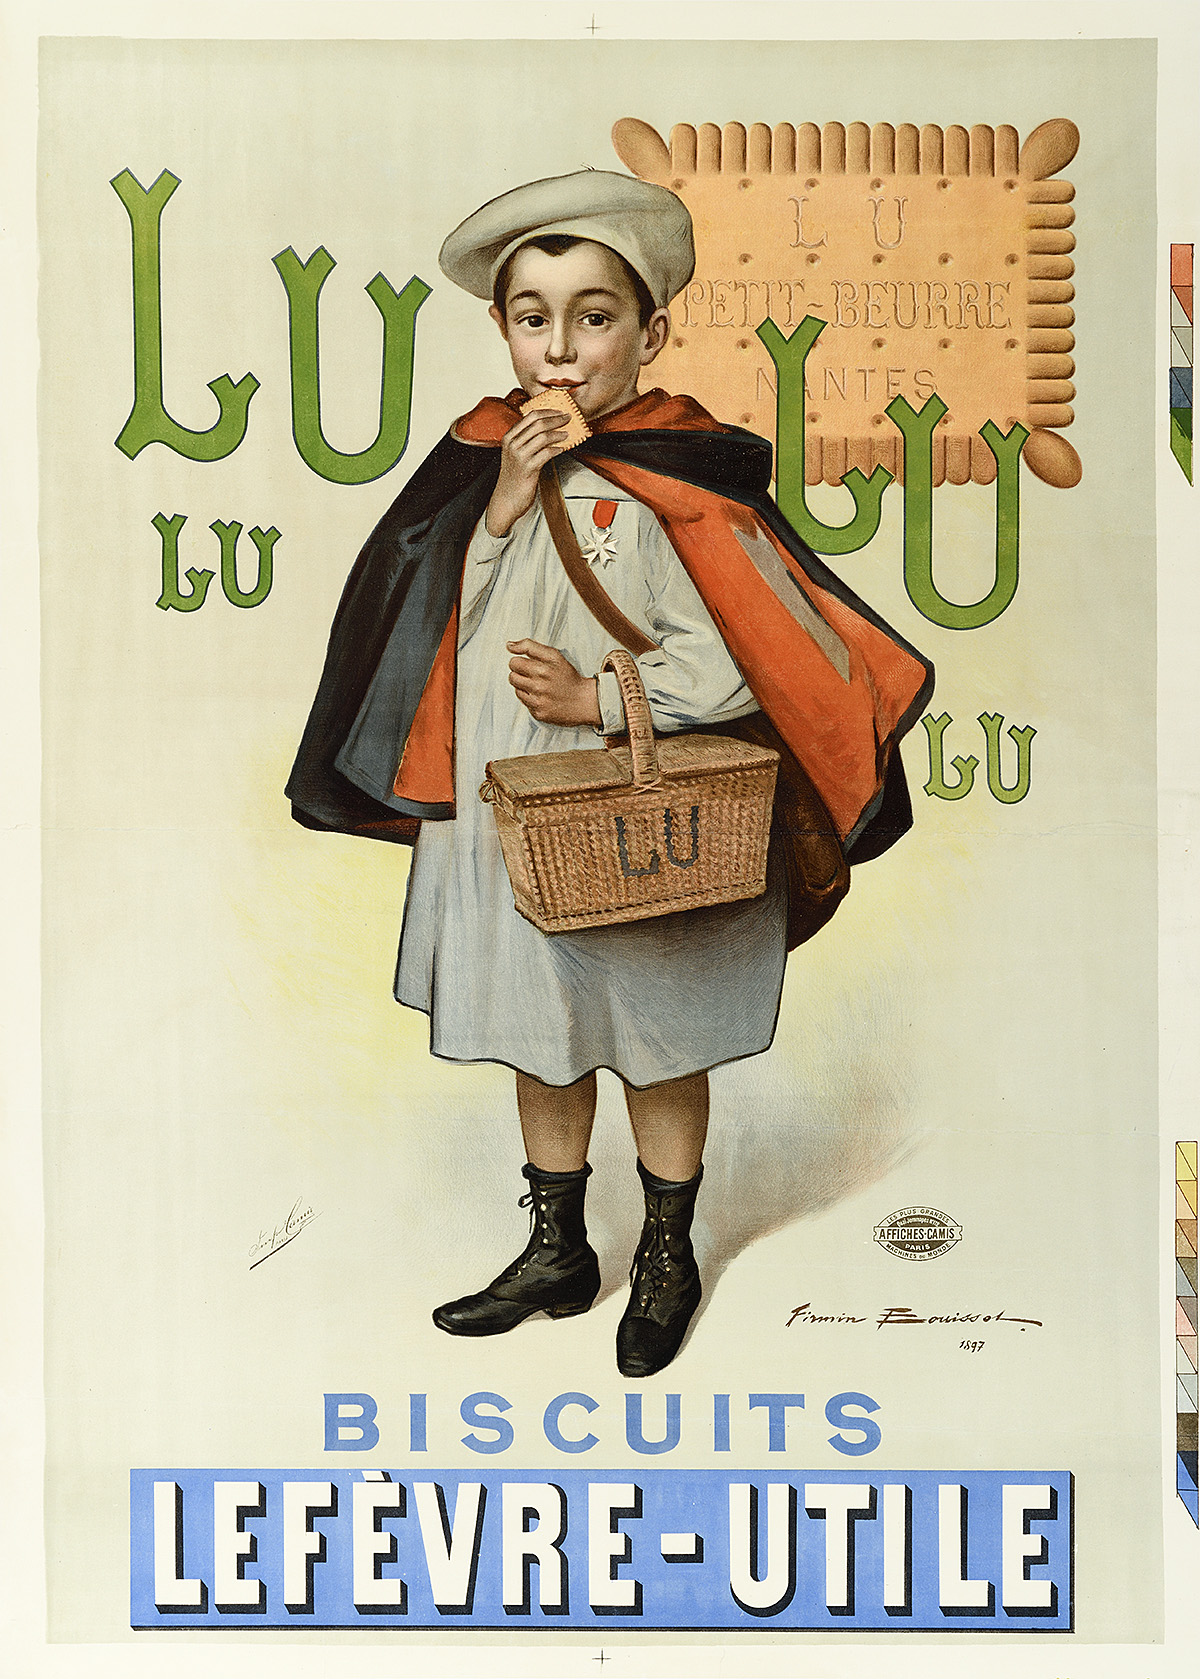 illustrational poster of a schoolboy holding a basket and eating a biscuit